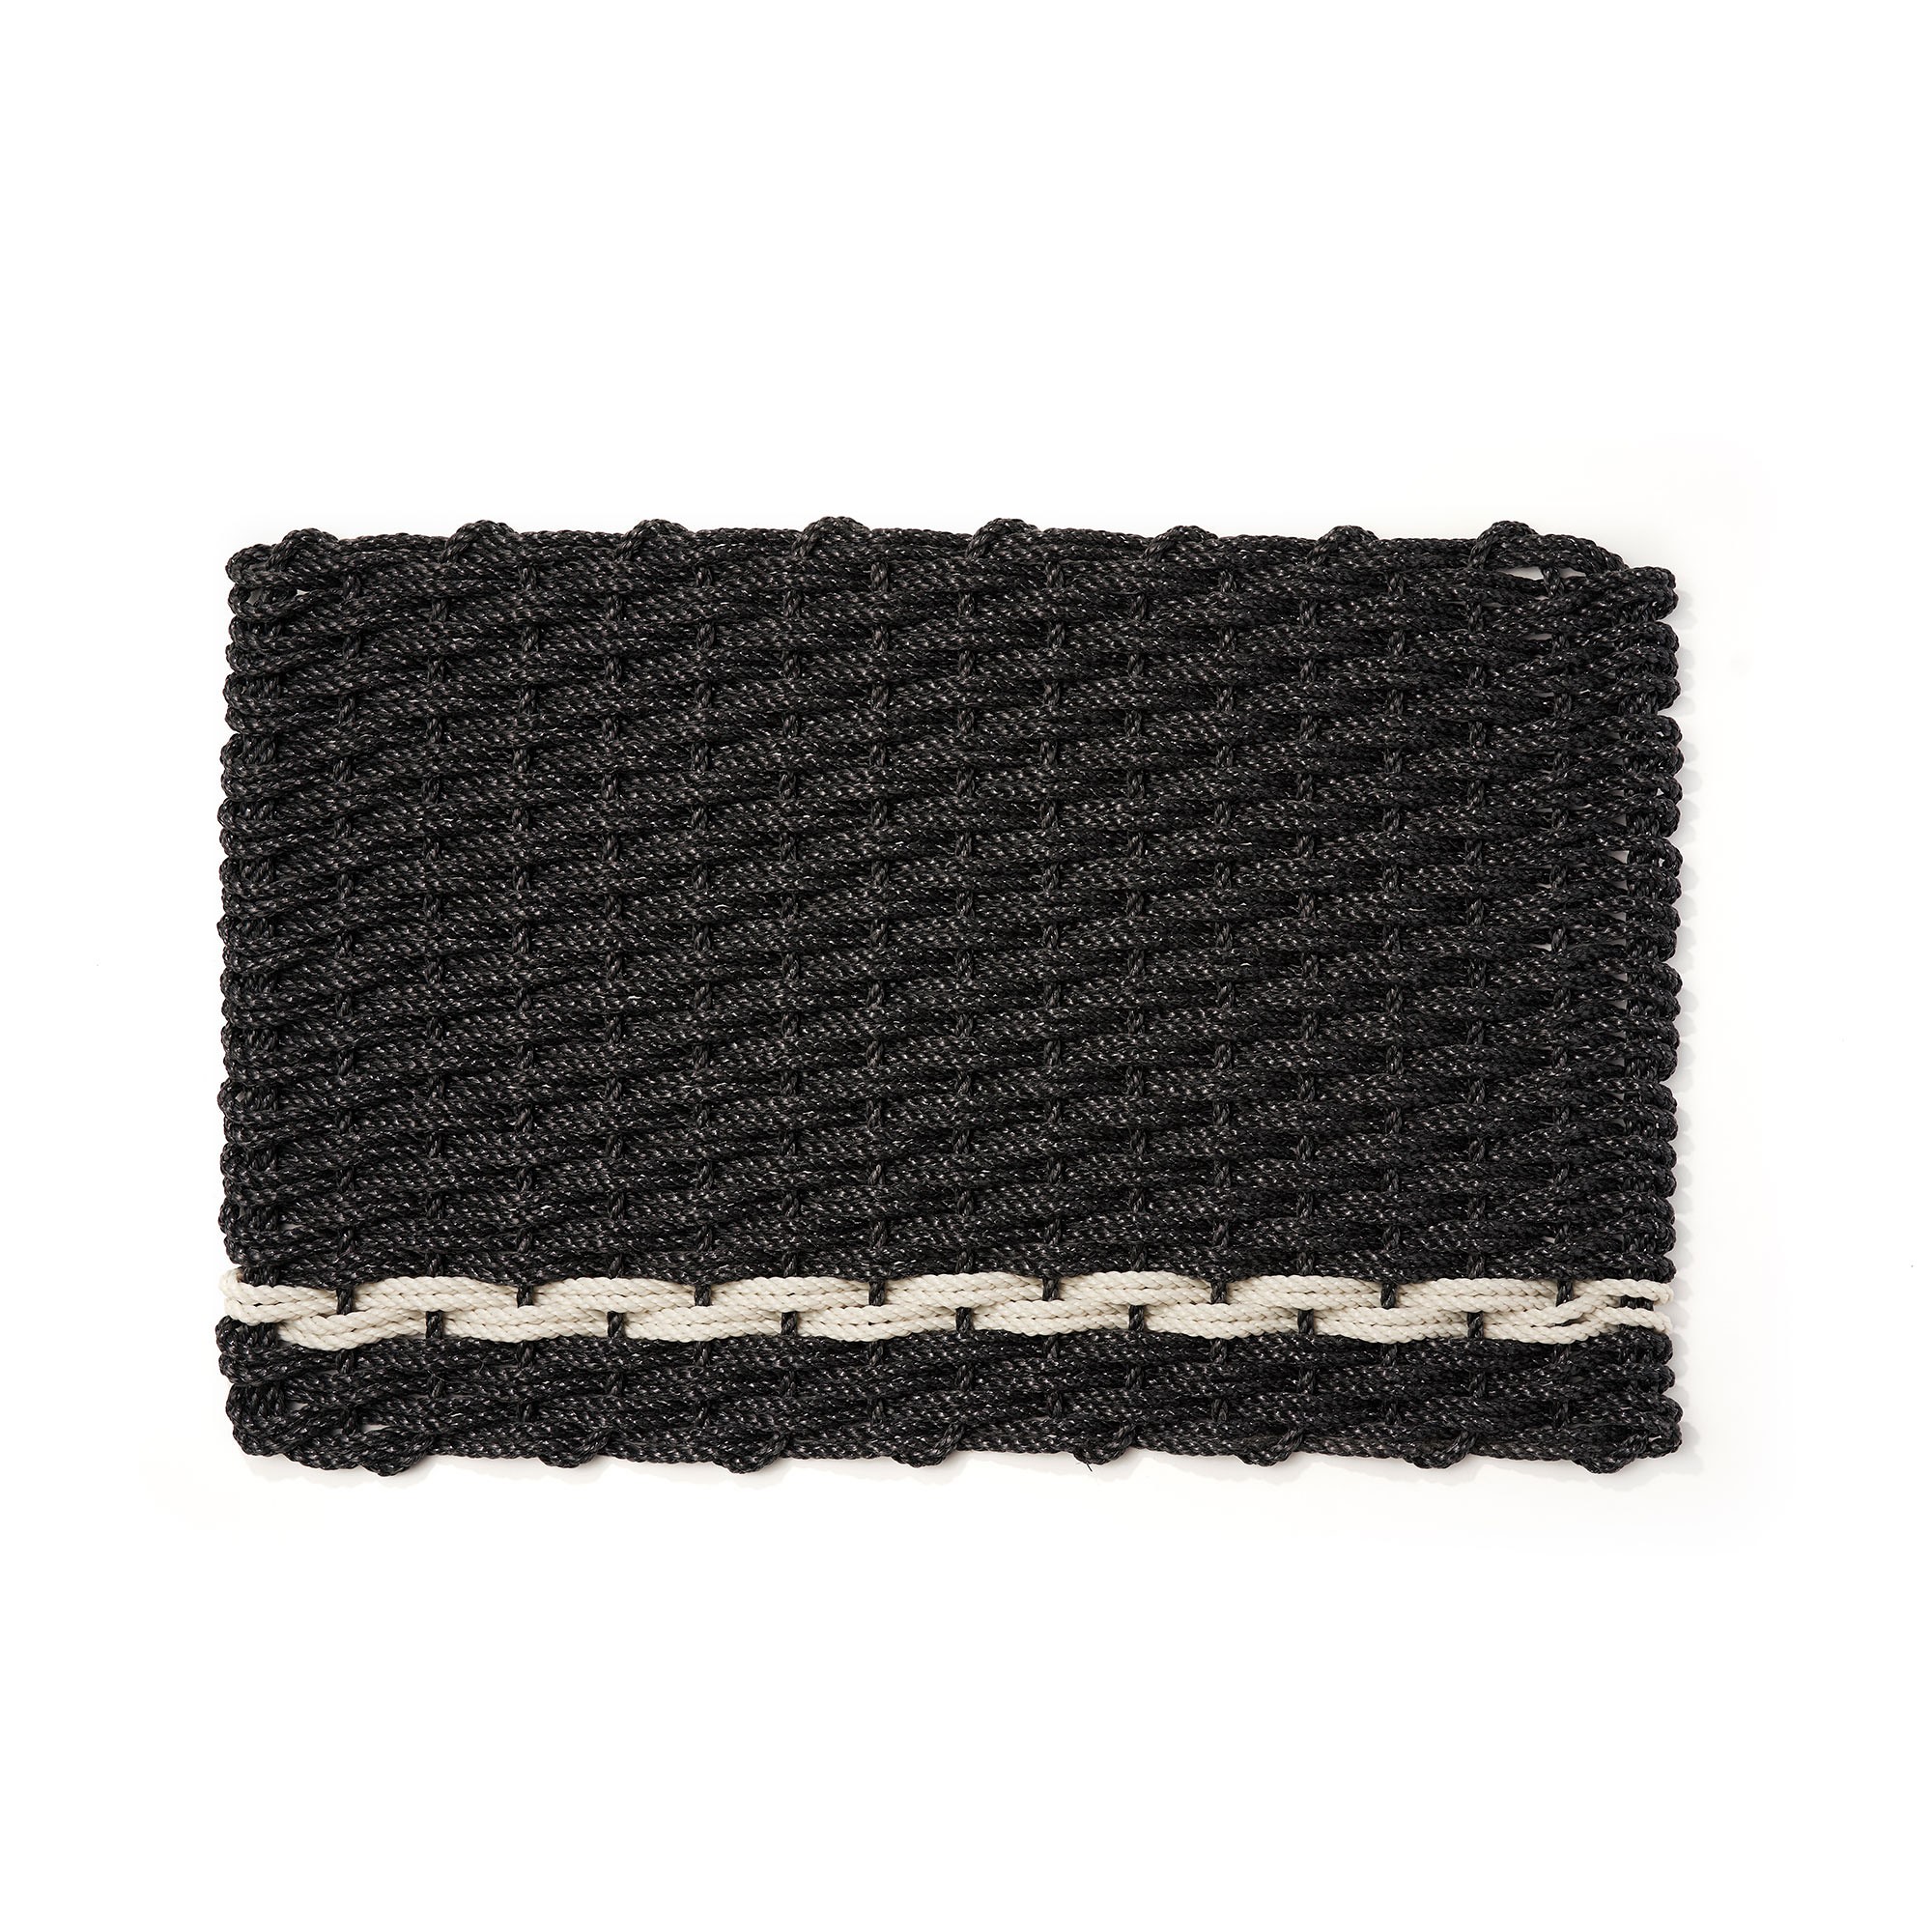 The Rope Co. Charcoal with Oyster Stripe Doormat